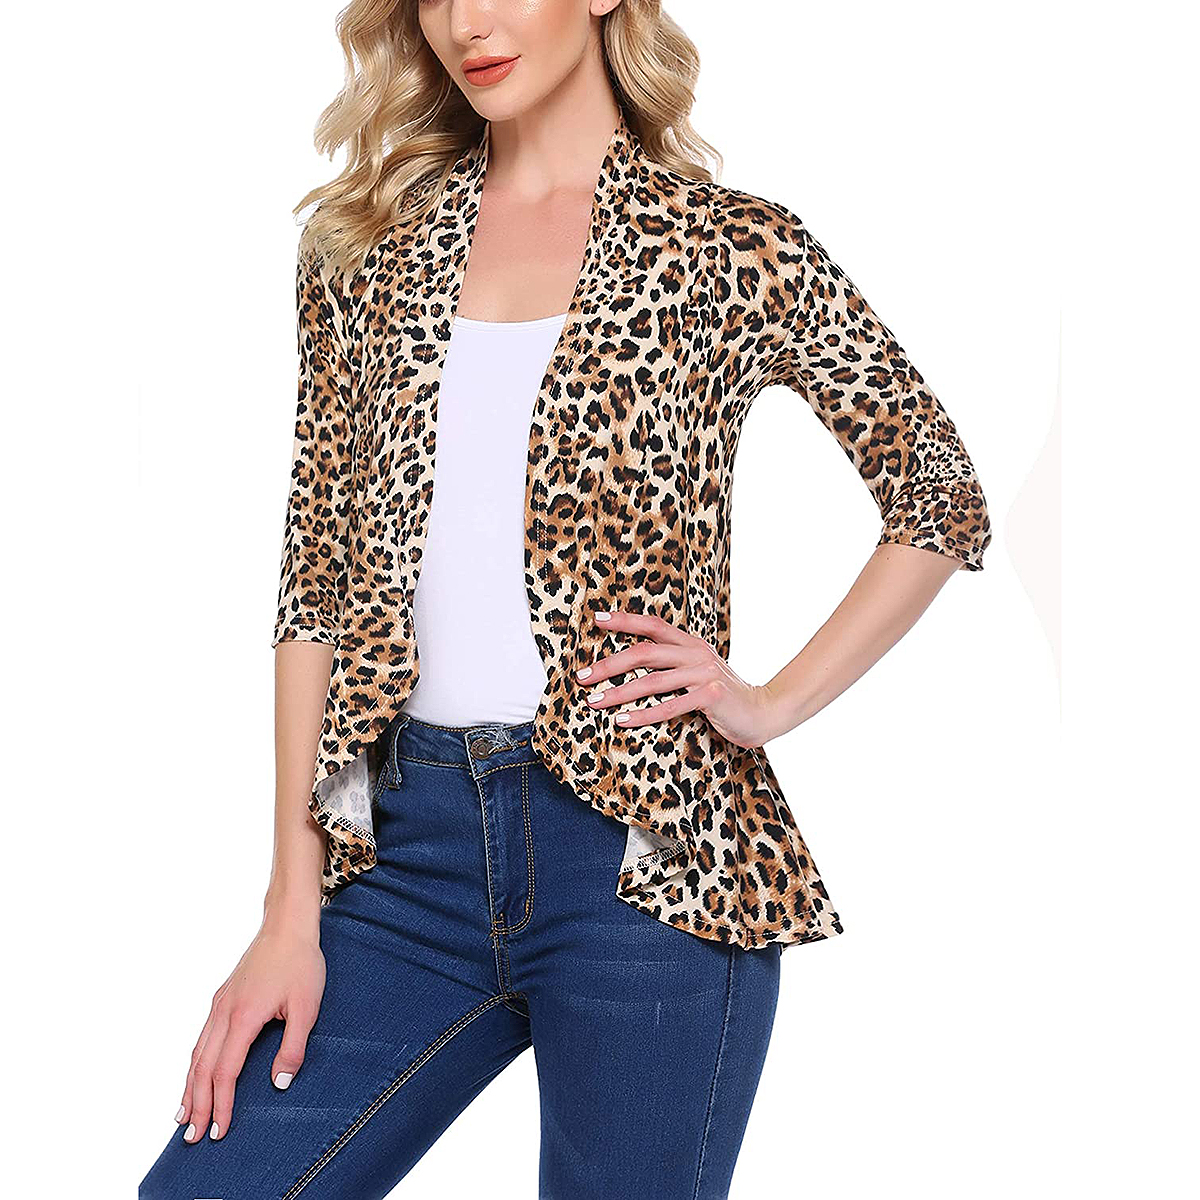 Zeagoo Leopard Cardigan Will Give Your Outfits New Life | UsWeekly